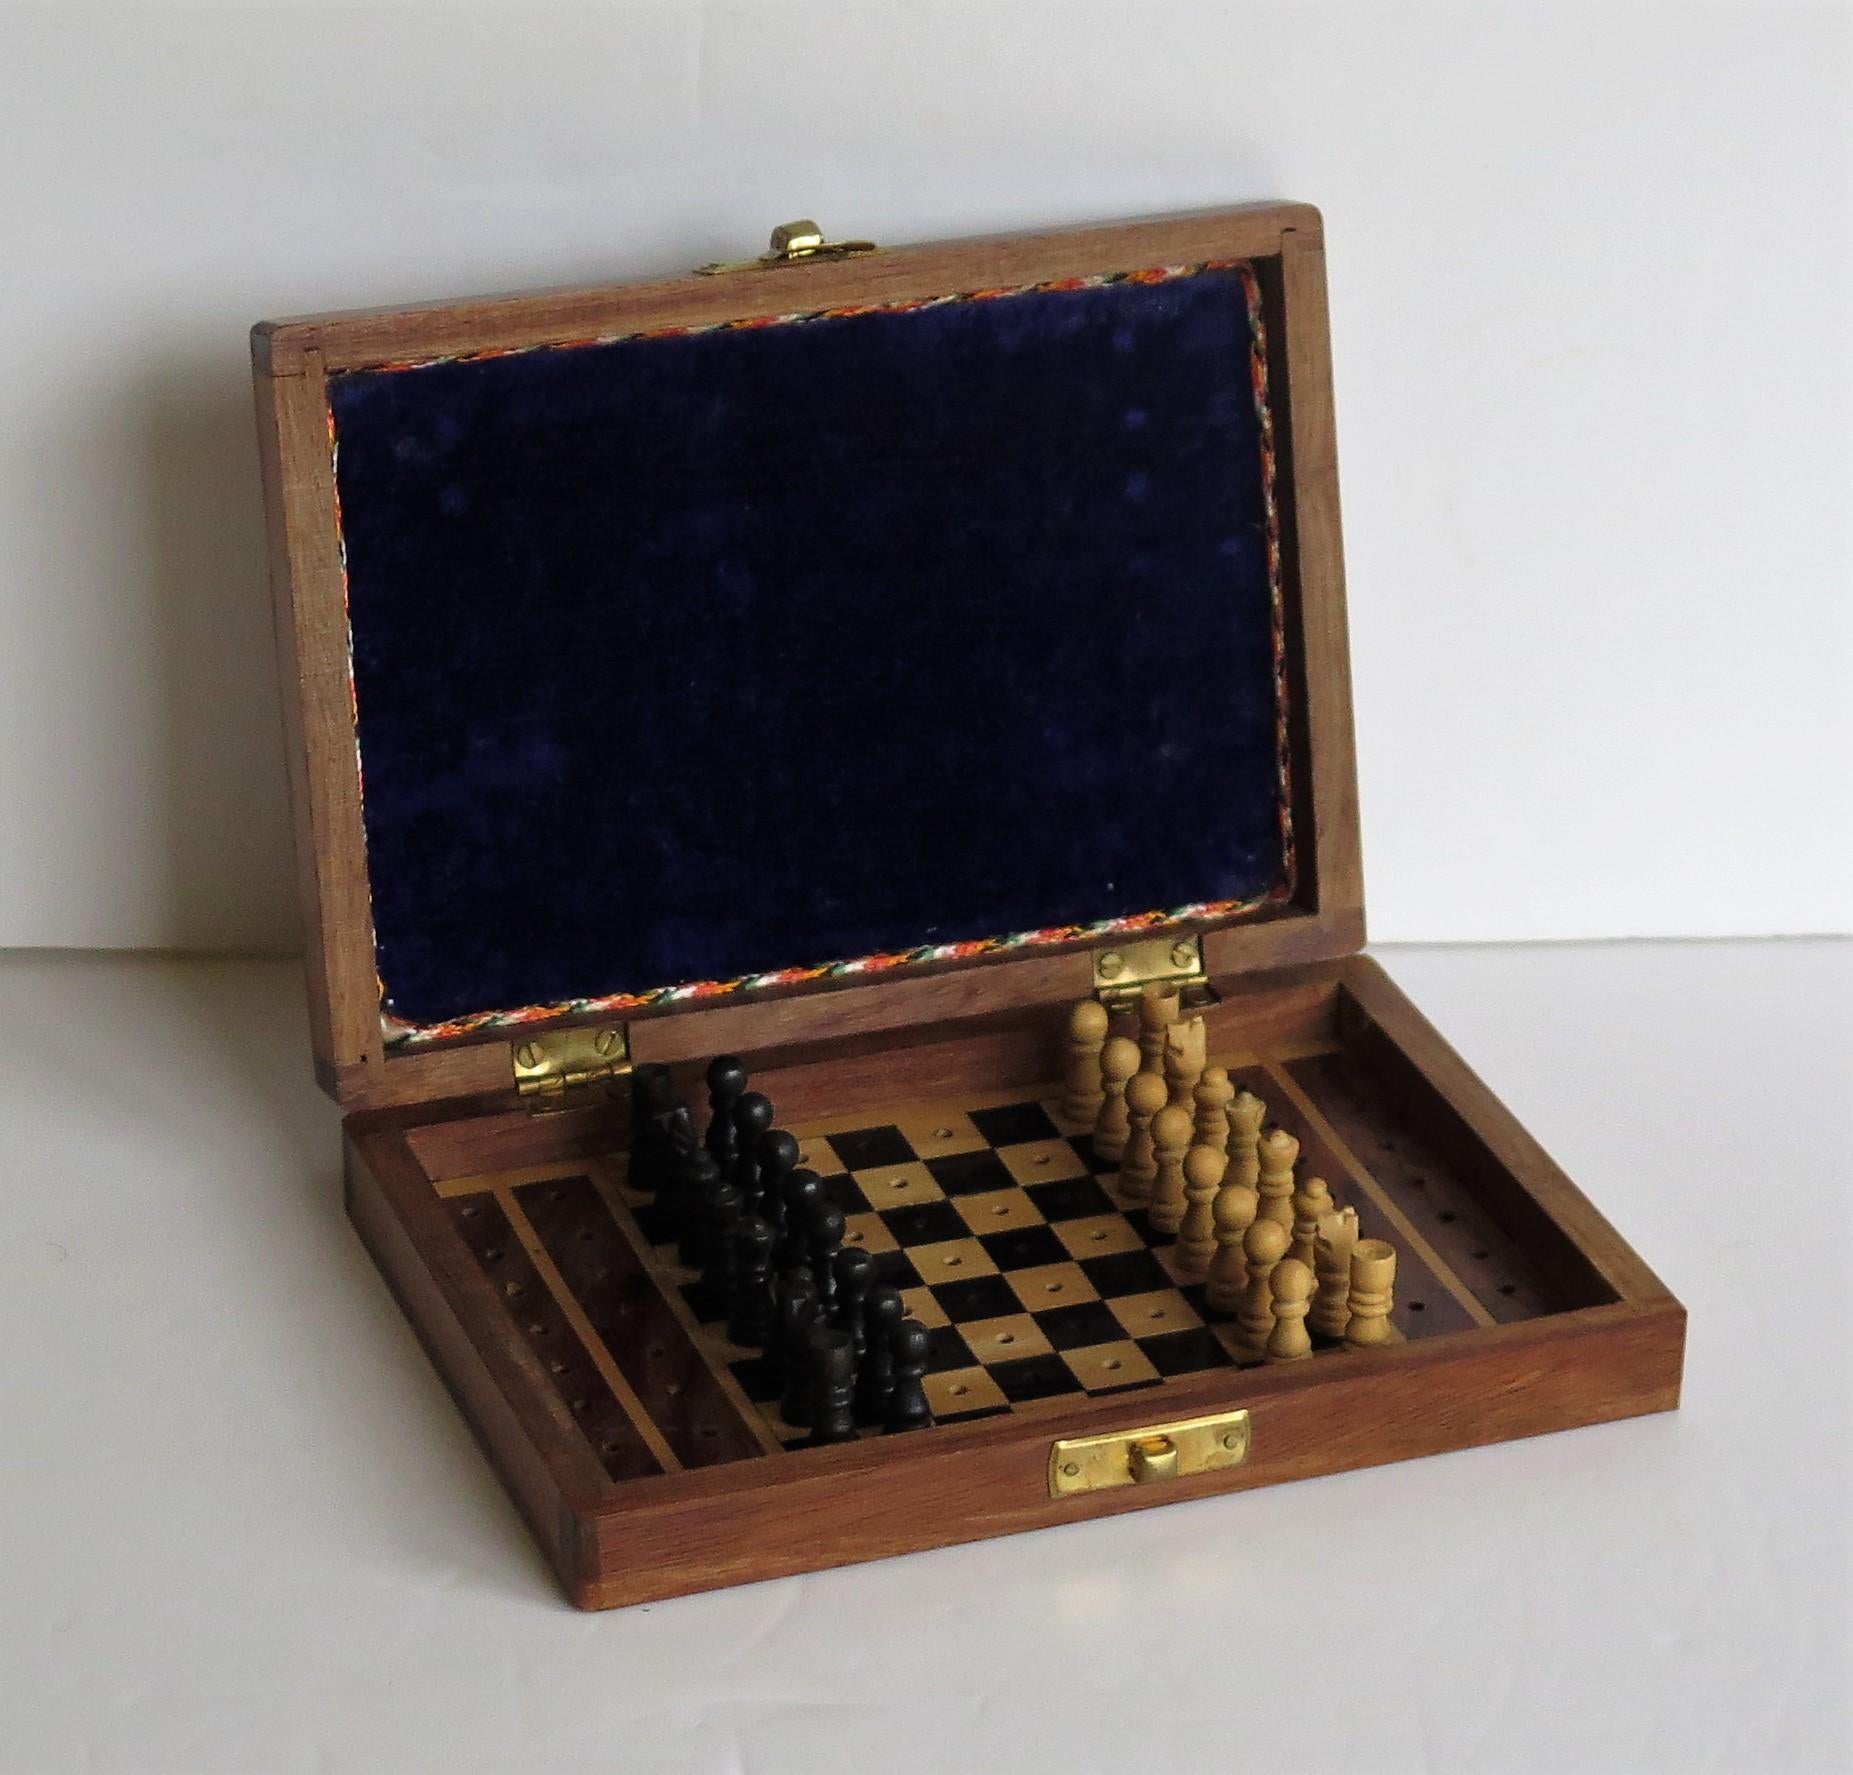 This is a good quality handmade Miniature or travelling wood chess set game of 32 pieces in its own inlaid hardwood box, which we date to the early 20th century, circa 1920.

This piece is all handmade. The chess set is complete with 32 wood pieces